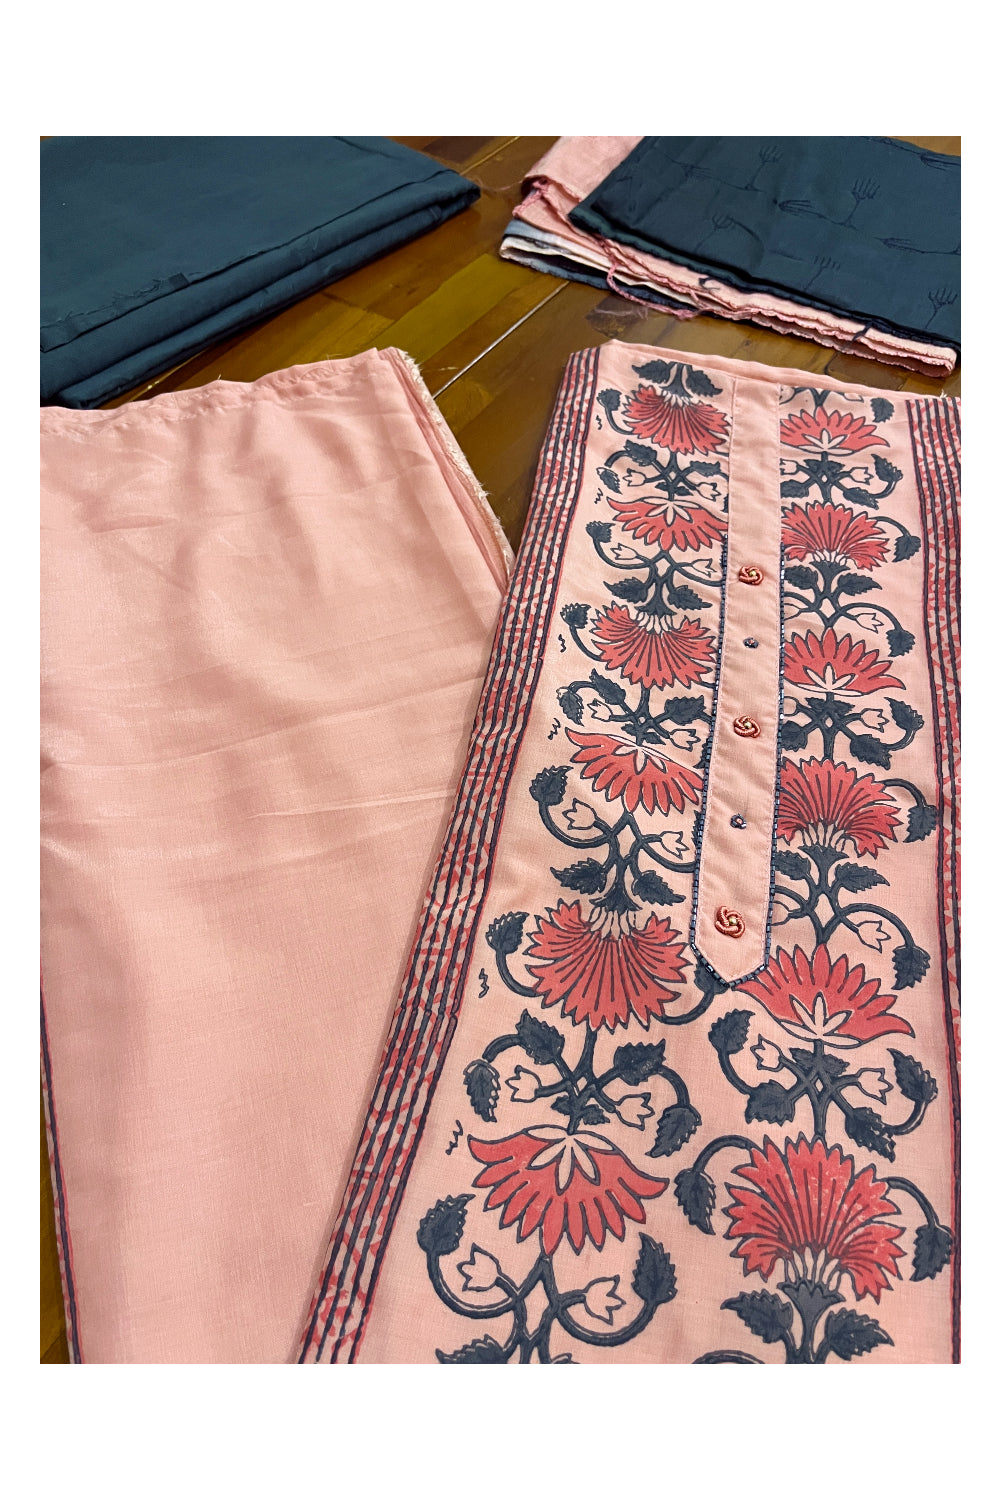 Southloom™ Cotton Churidar Salwar Suit Material in Peach with Floral Prints